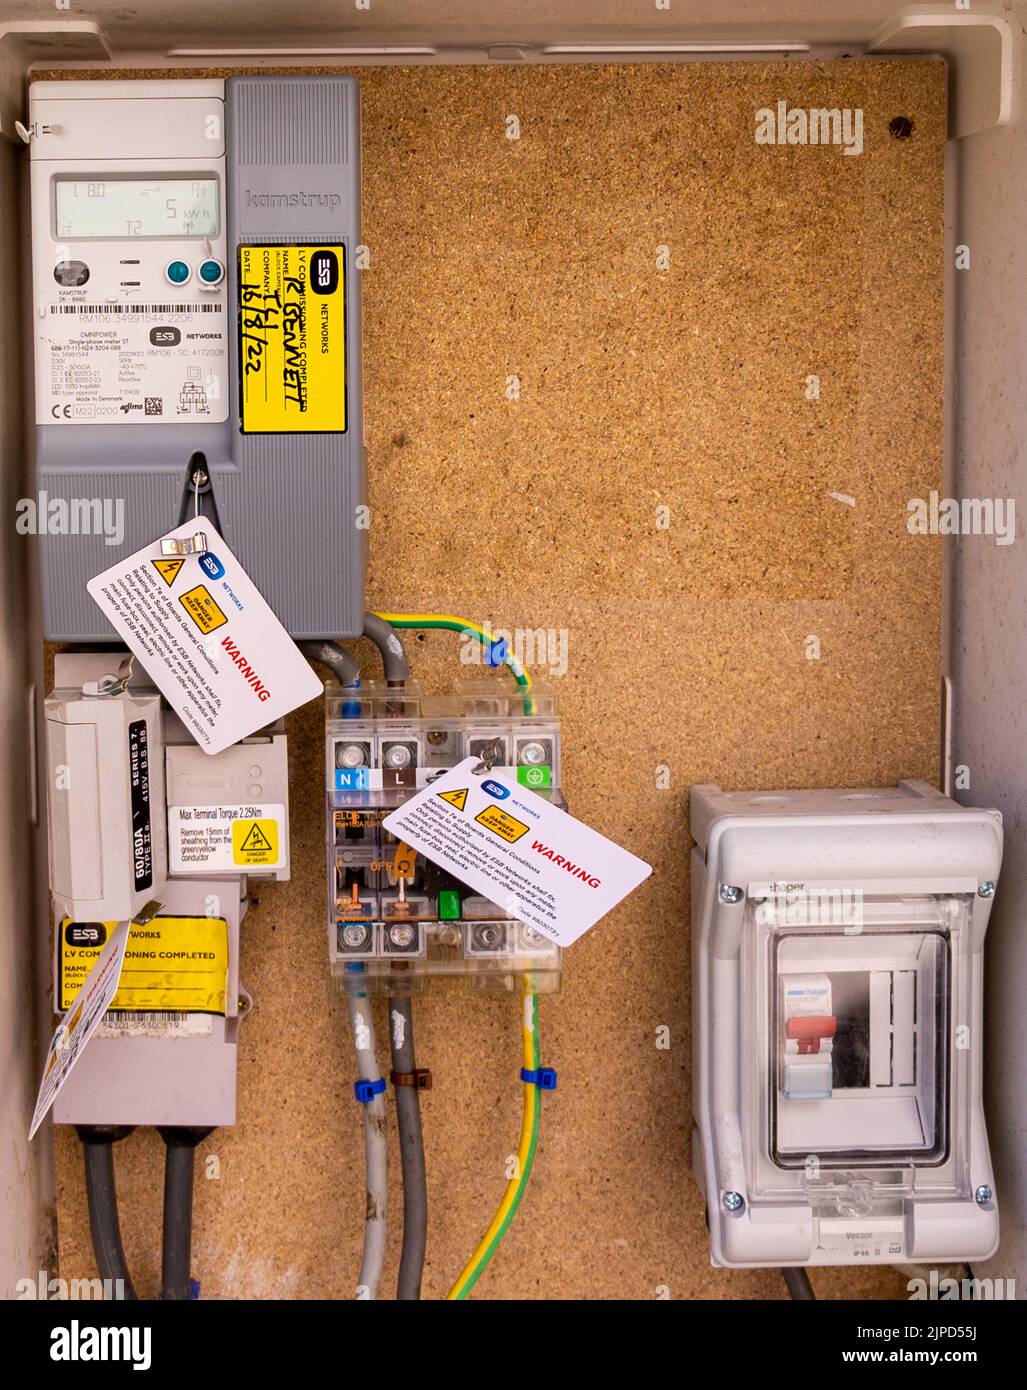 Sim card smart electricity meter in domestic fuse box. Stock Photo